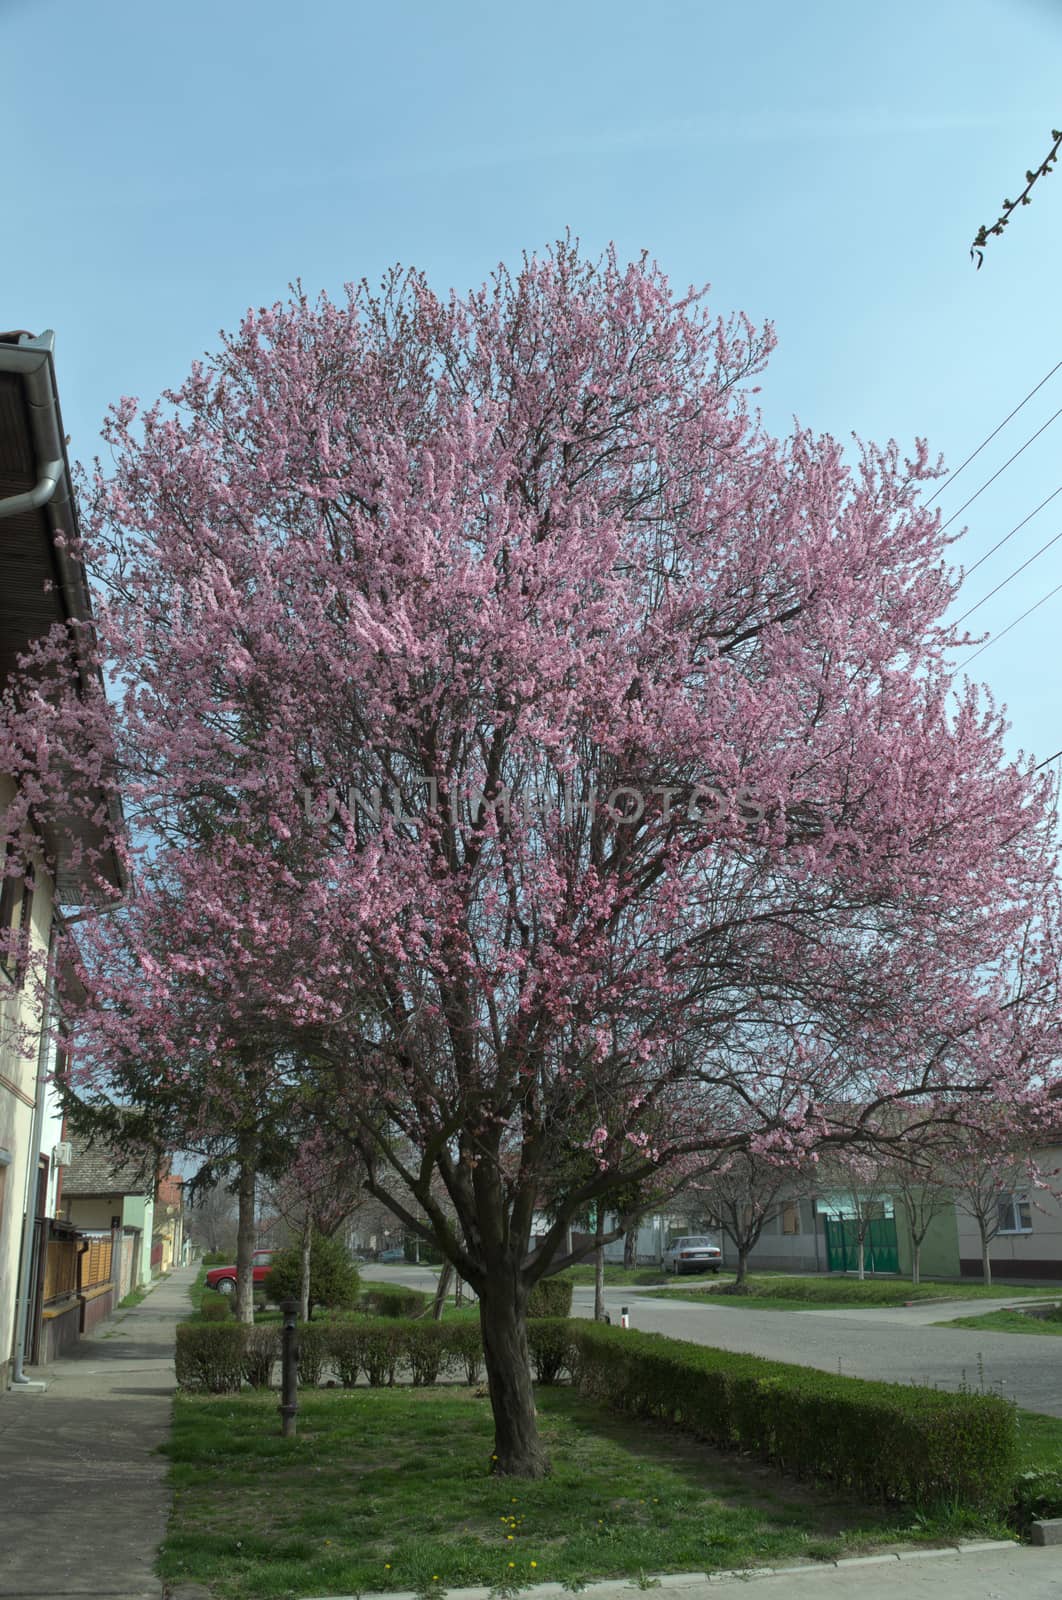 Tree blossoming with pink flowers, at spring time by sheriffkule